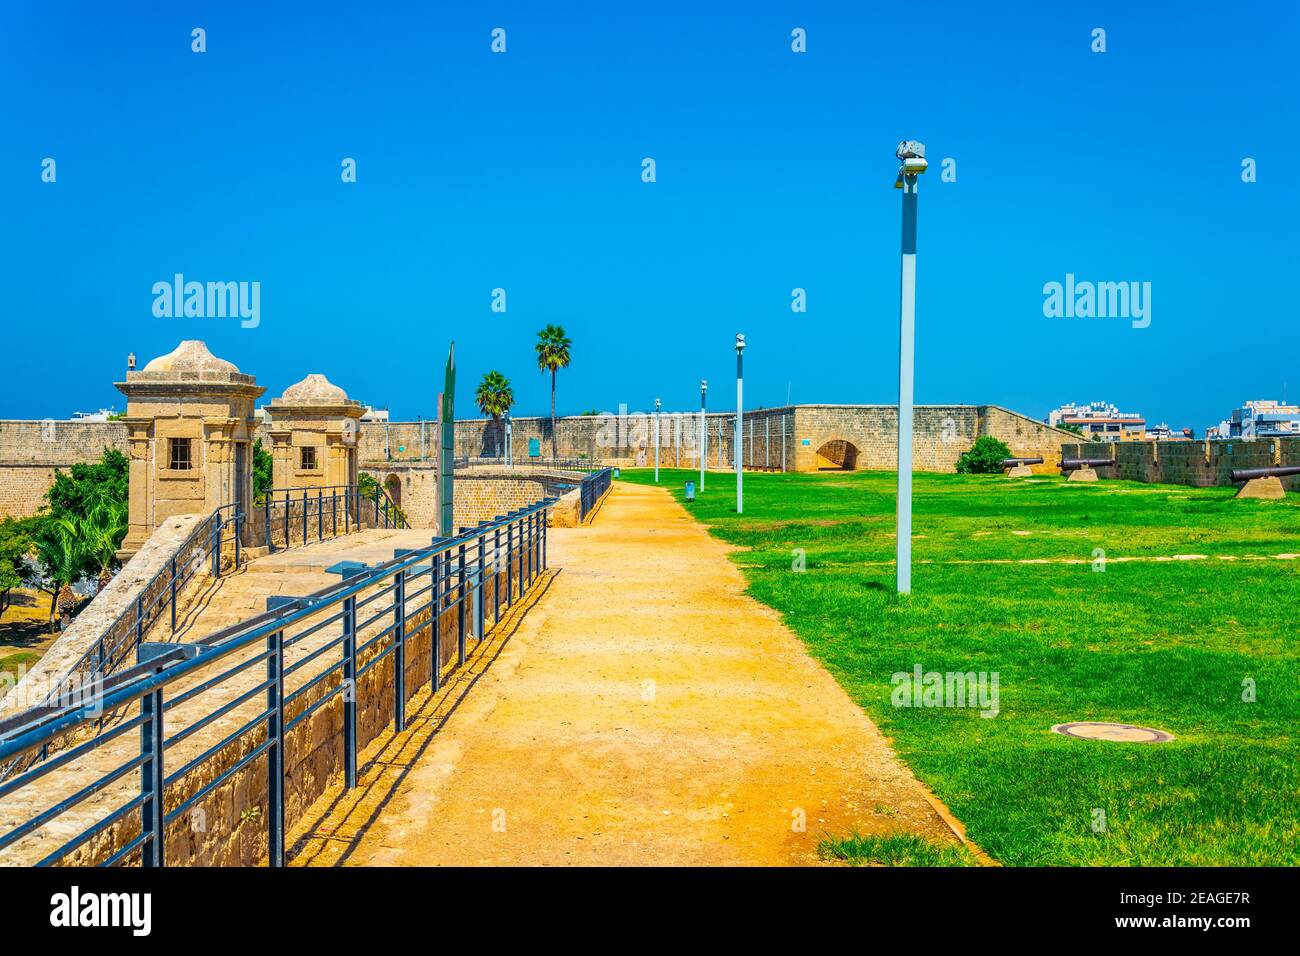 Old fortification of Acre/Akko in Israel Stock Photo